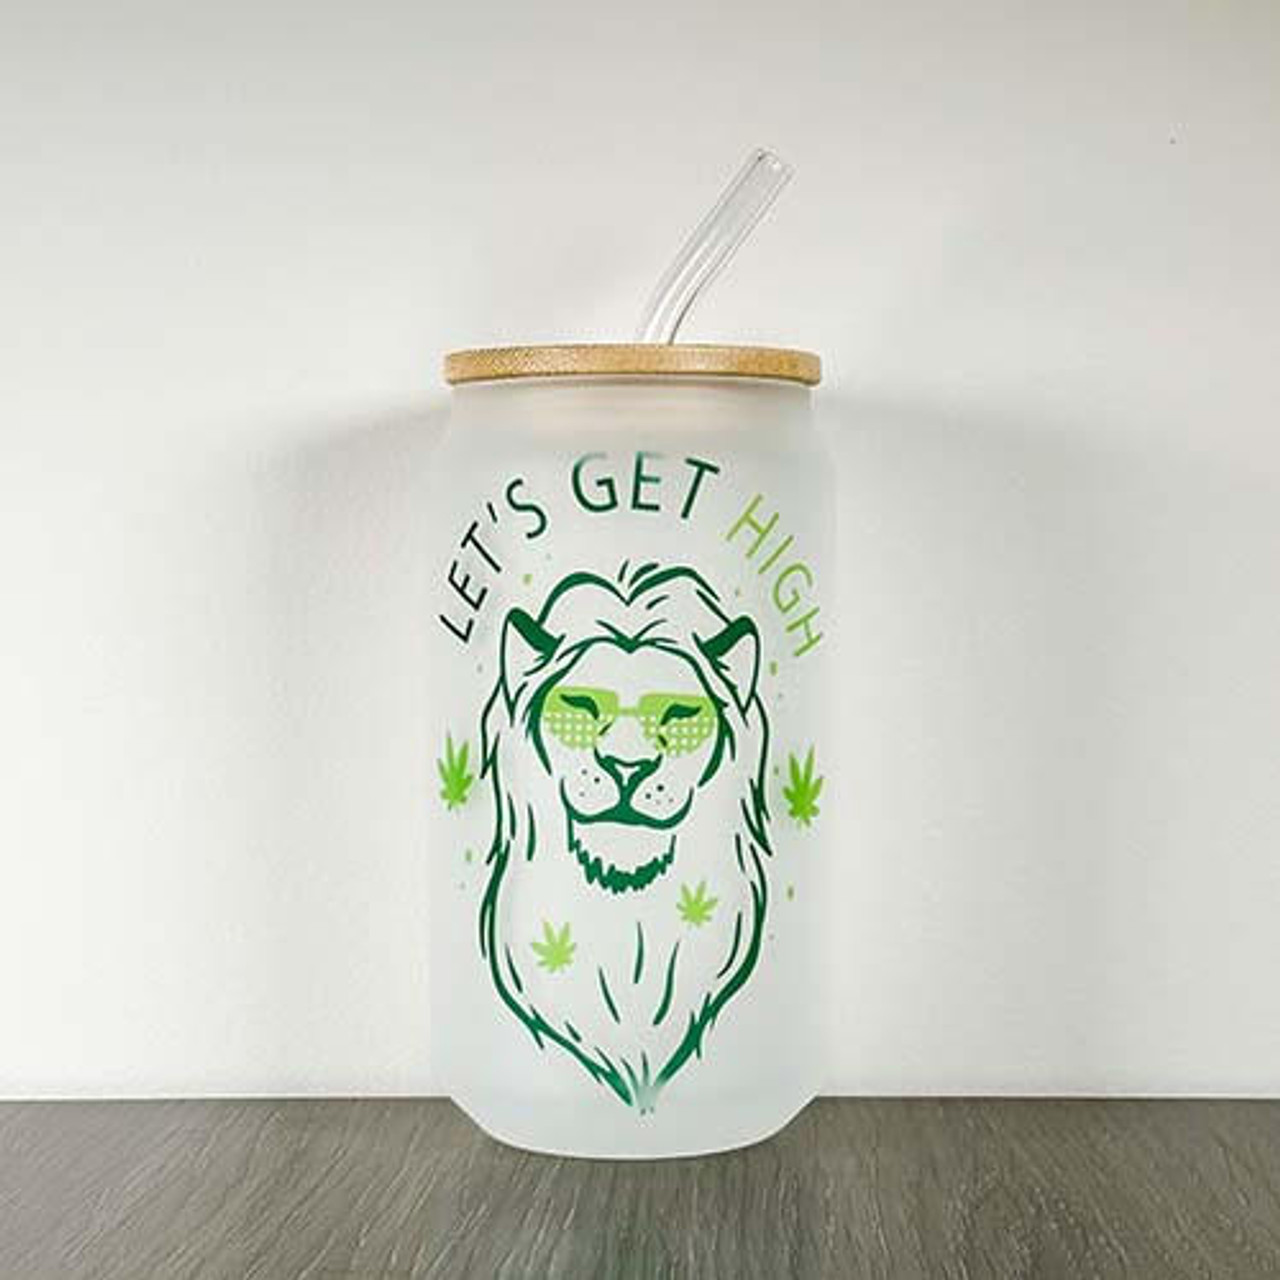 Sublimation Beer Can Glass With Bamboo Lid Wholesale